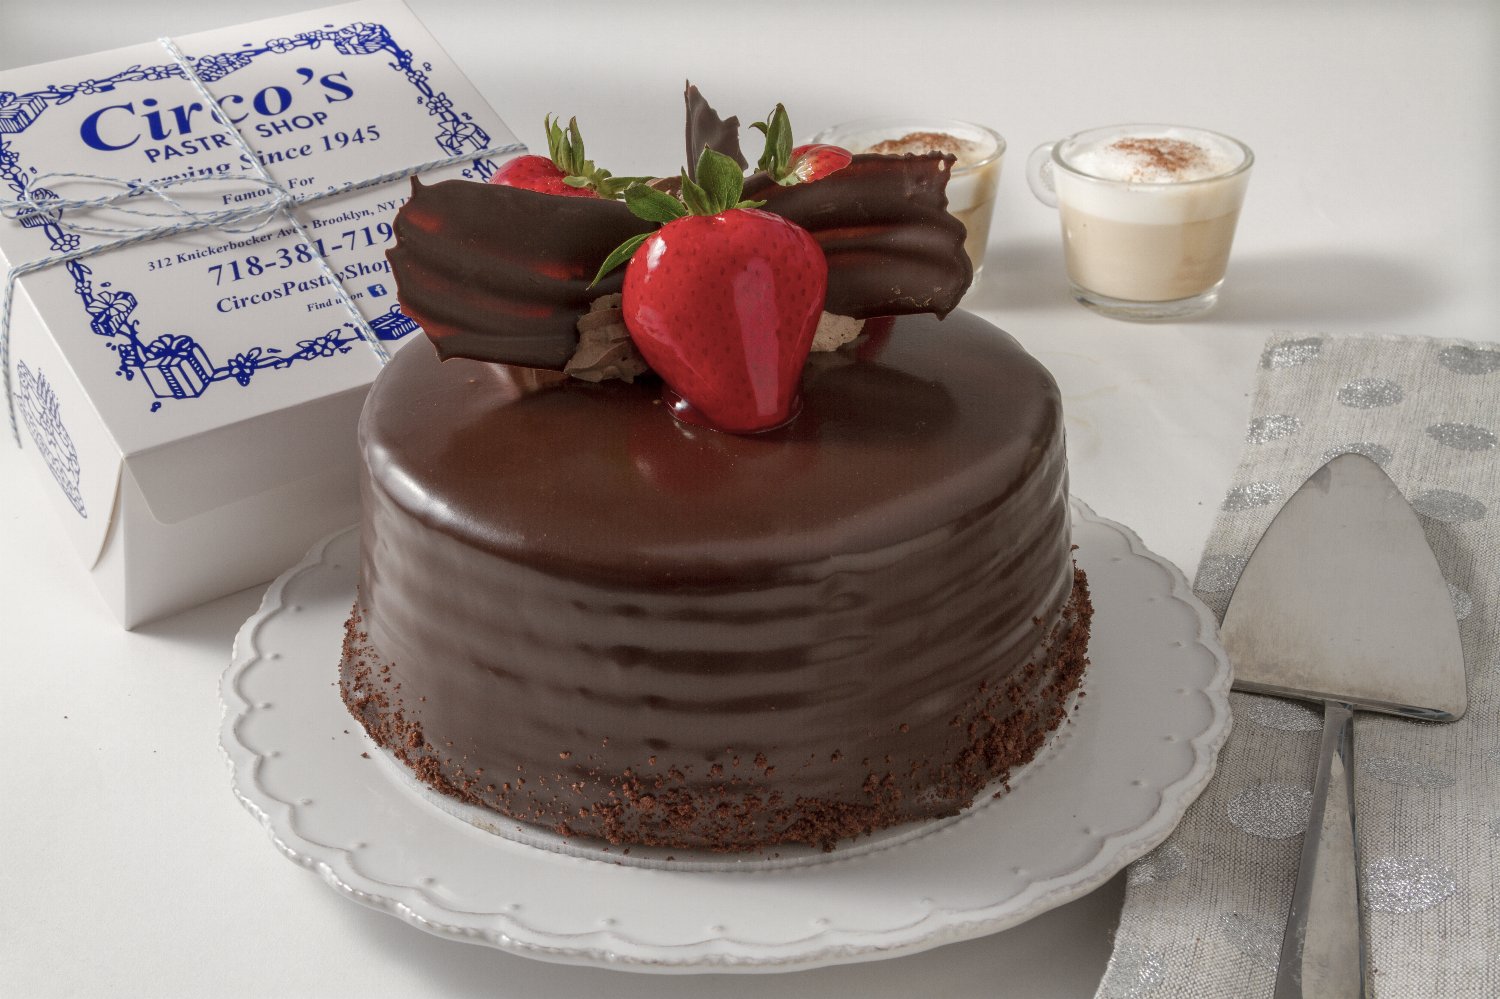 Chocolate Mousse Cake (BEST SELLER) For Local Delivery or Curbside Pickup ONLY